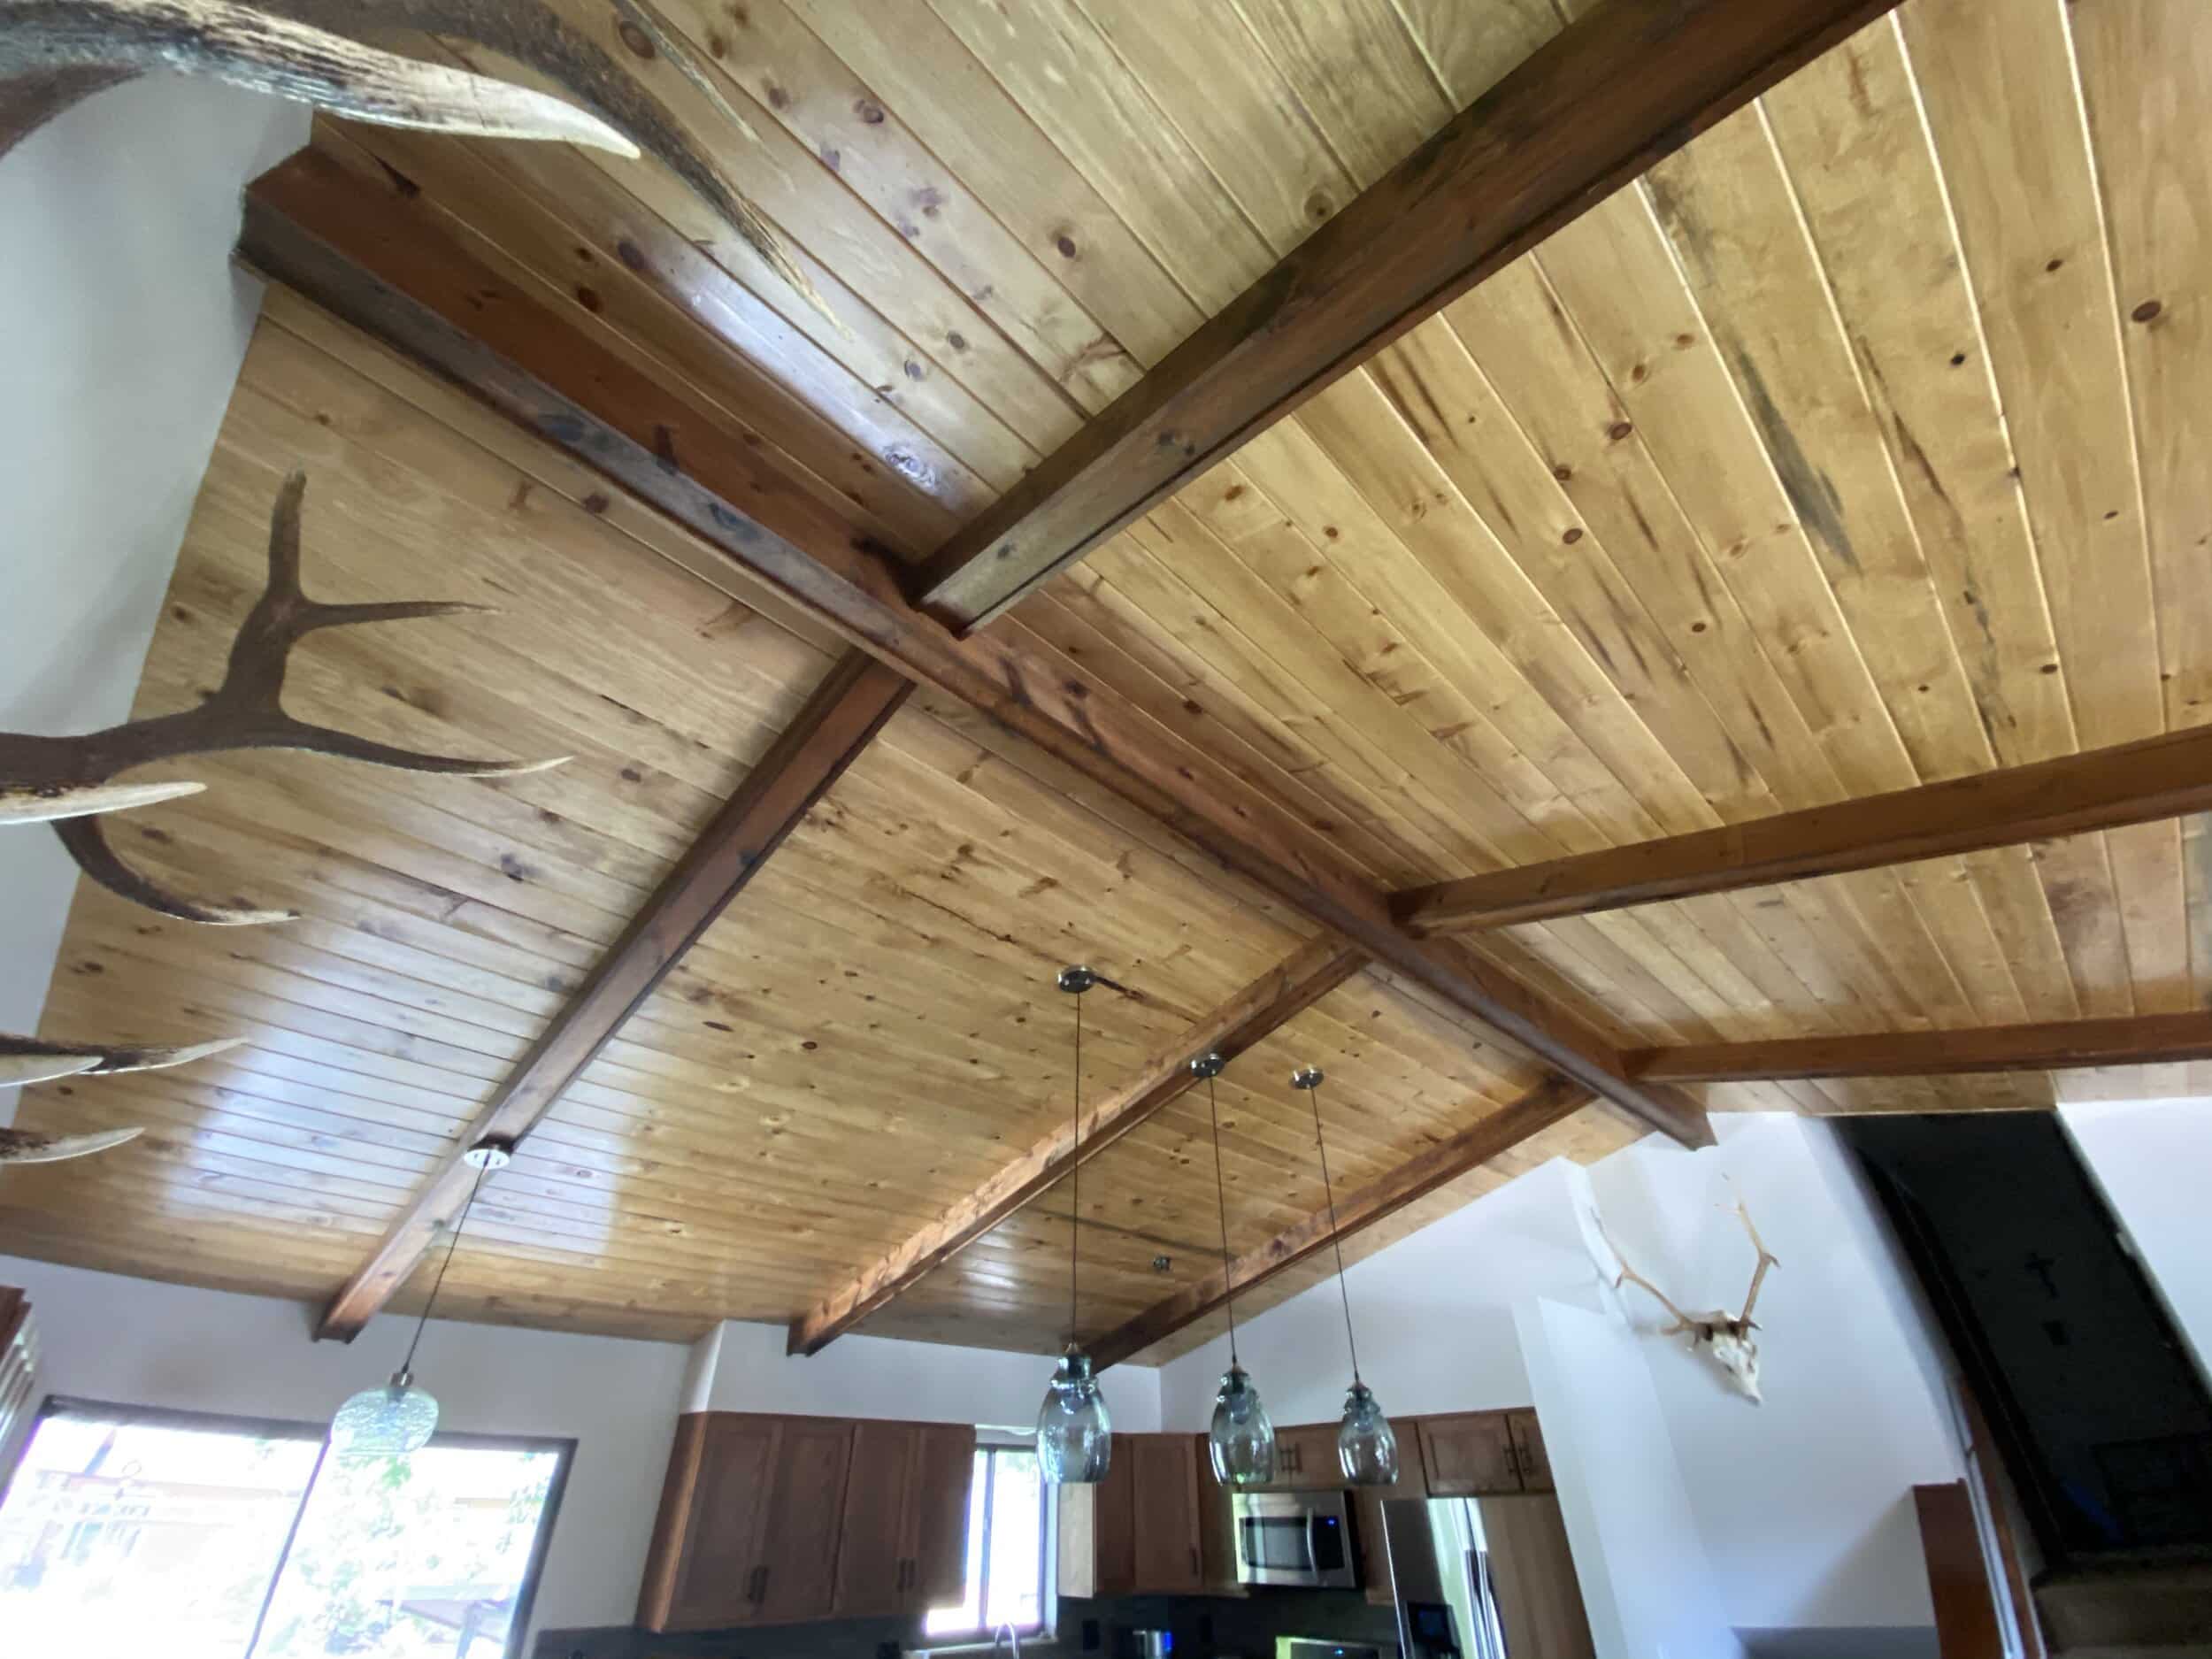 Vaulted wooden ceiling with support beams in farmhouse style home